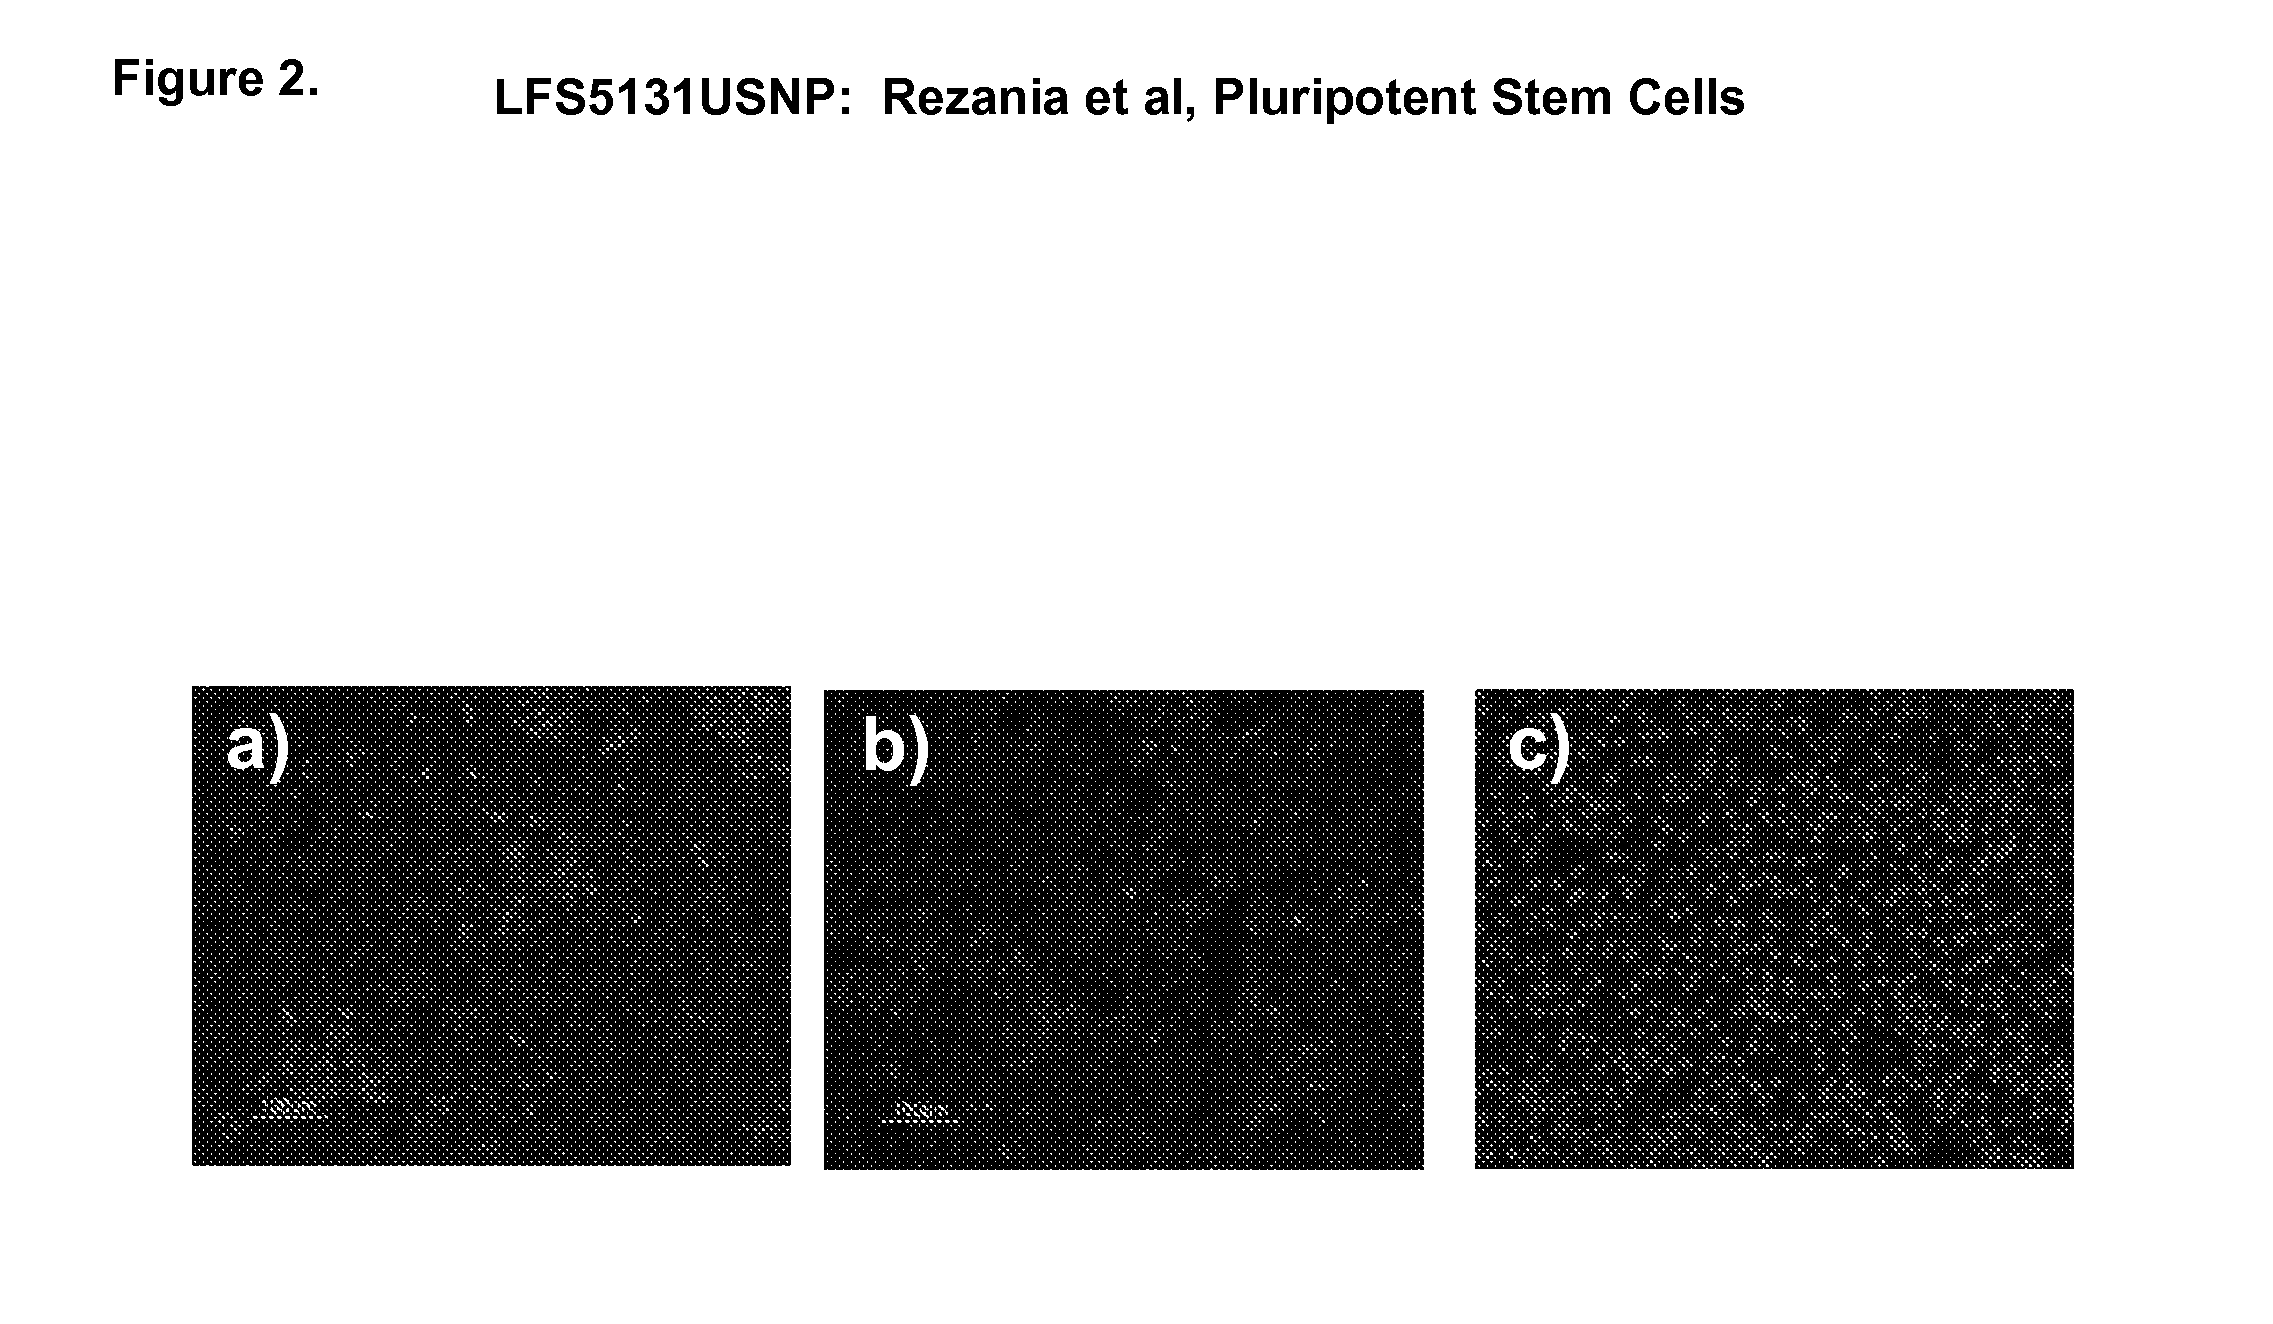 Differentiation of human embryonic stem cells